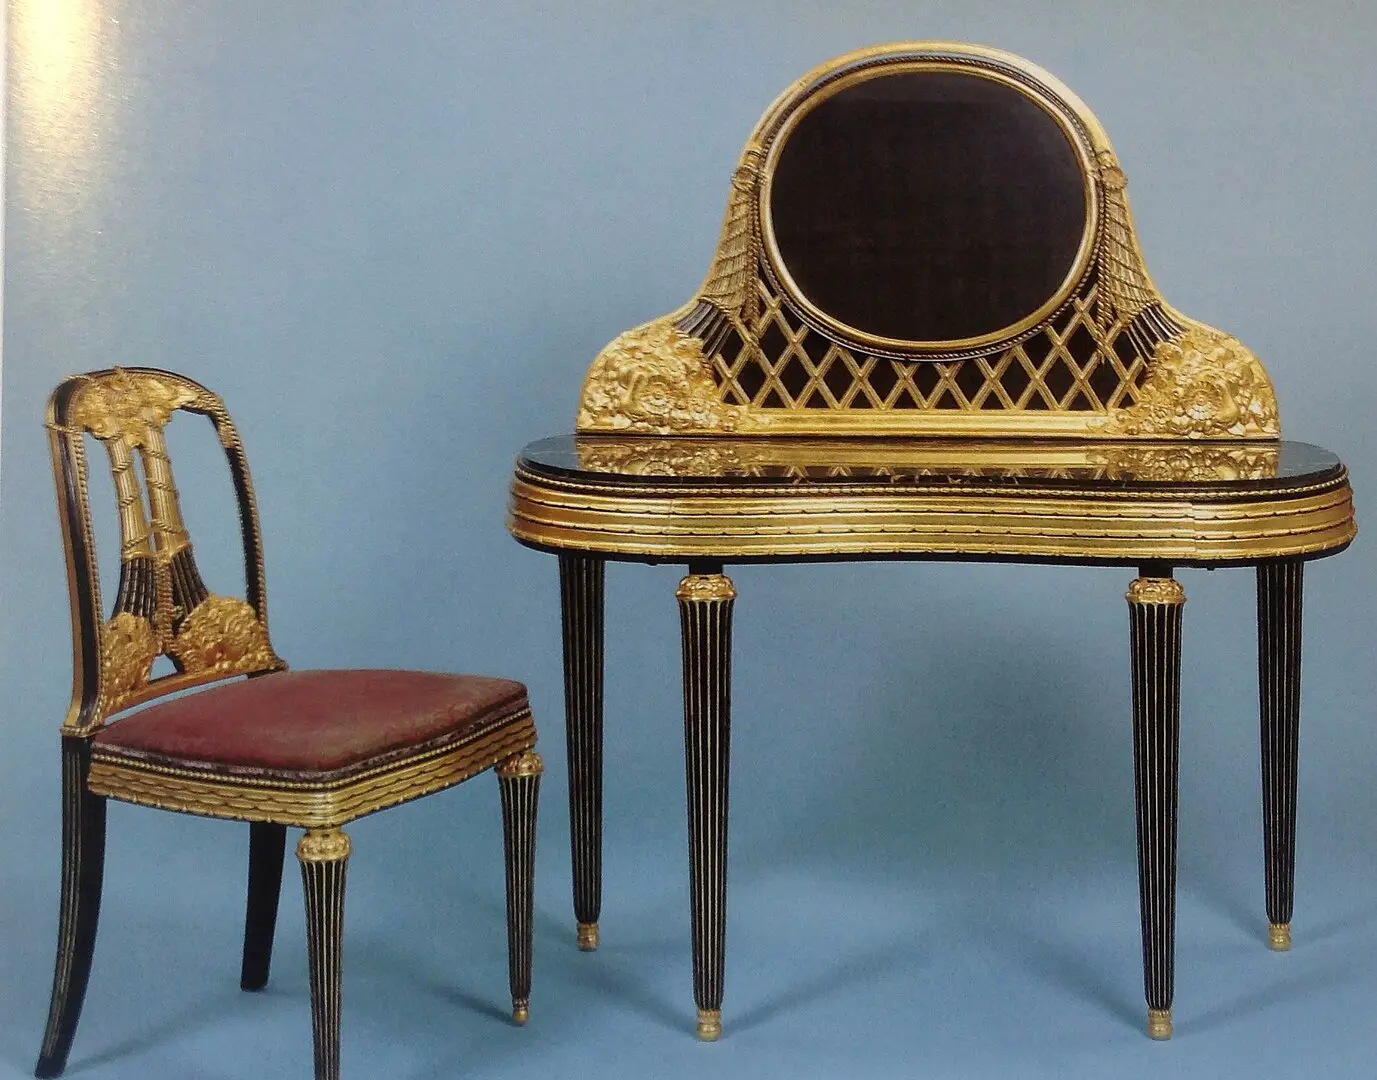 Dressing table and chair of marble and encrusted, lacquered, and gilded wood by Follot (1919–20)